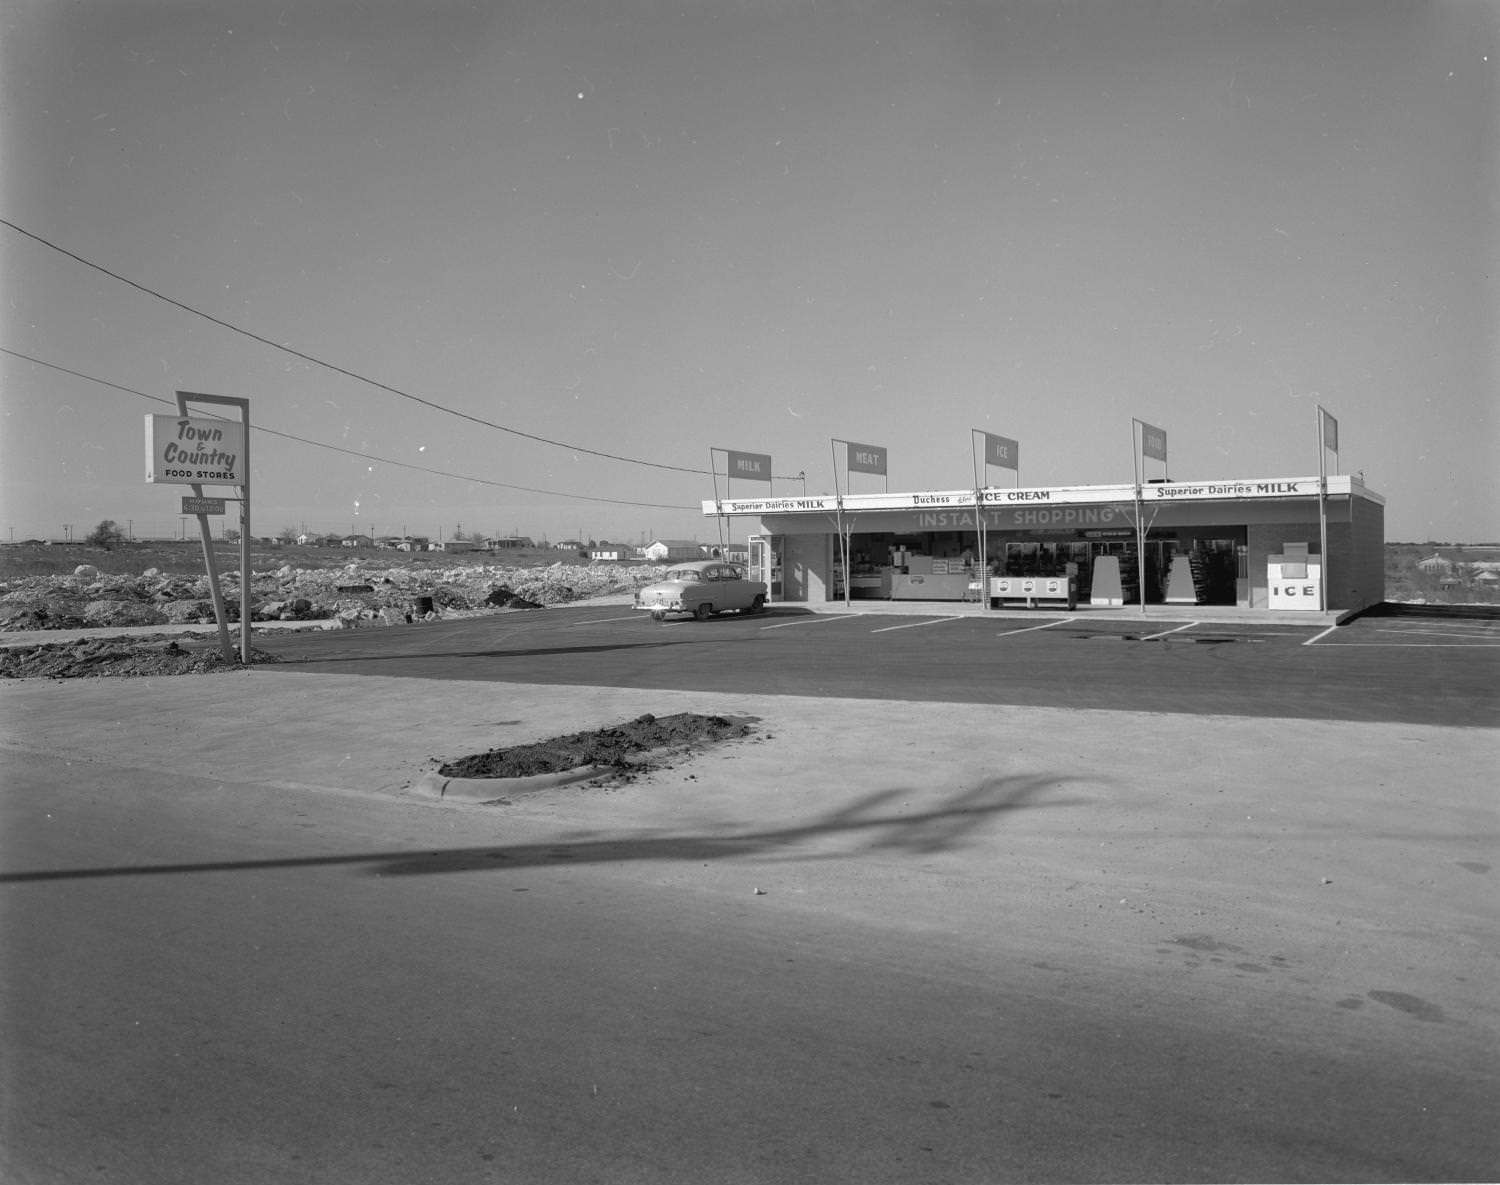 A grocery store called Town and Country, located on St. Johns Avenue, Austin Texas, 1963